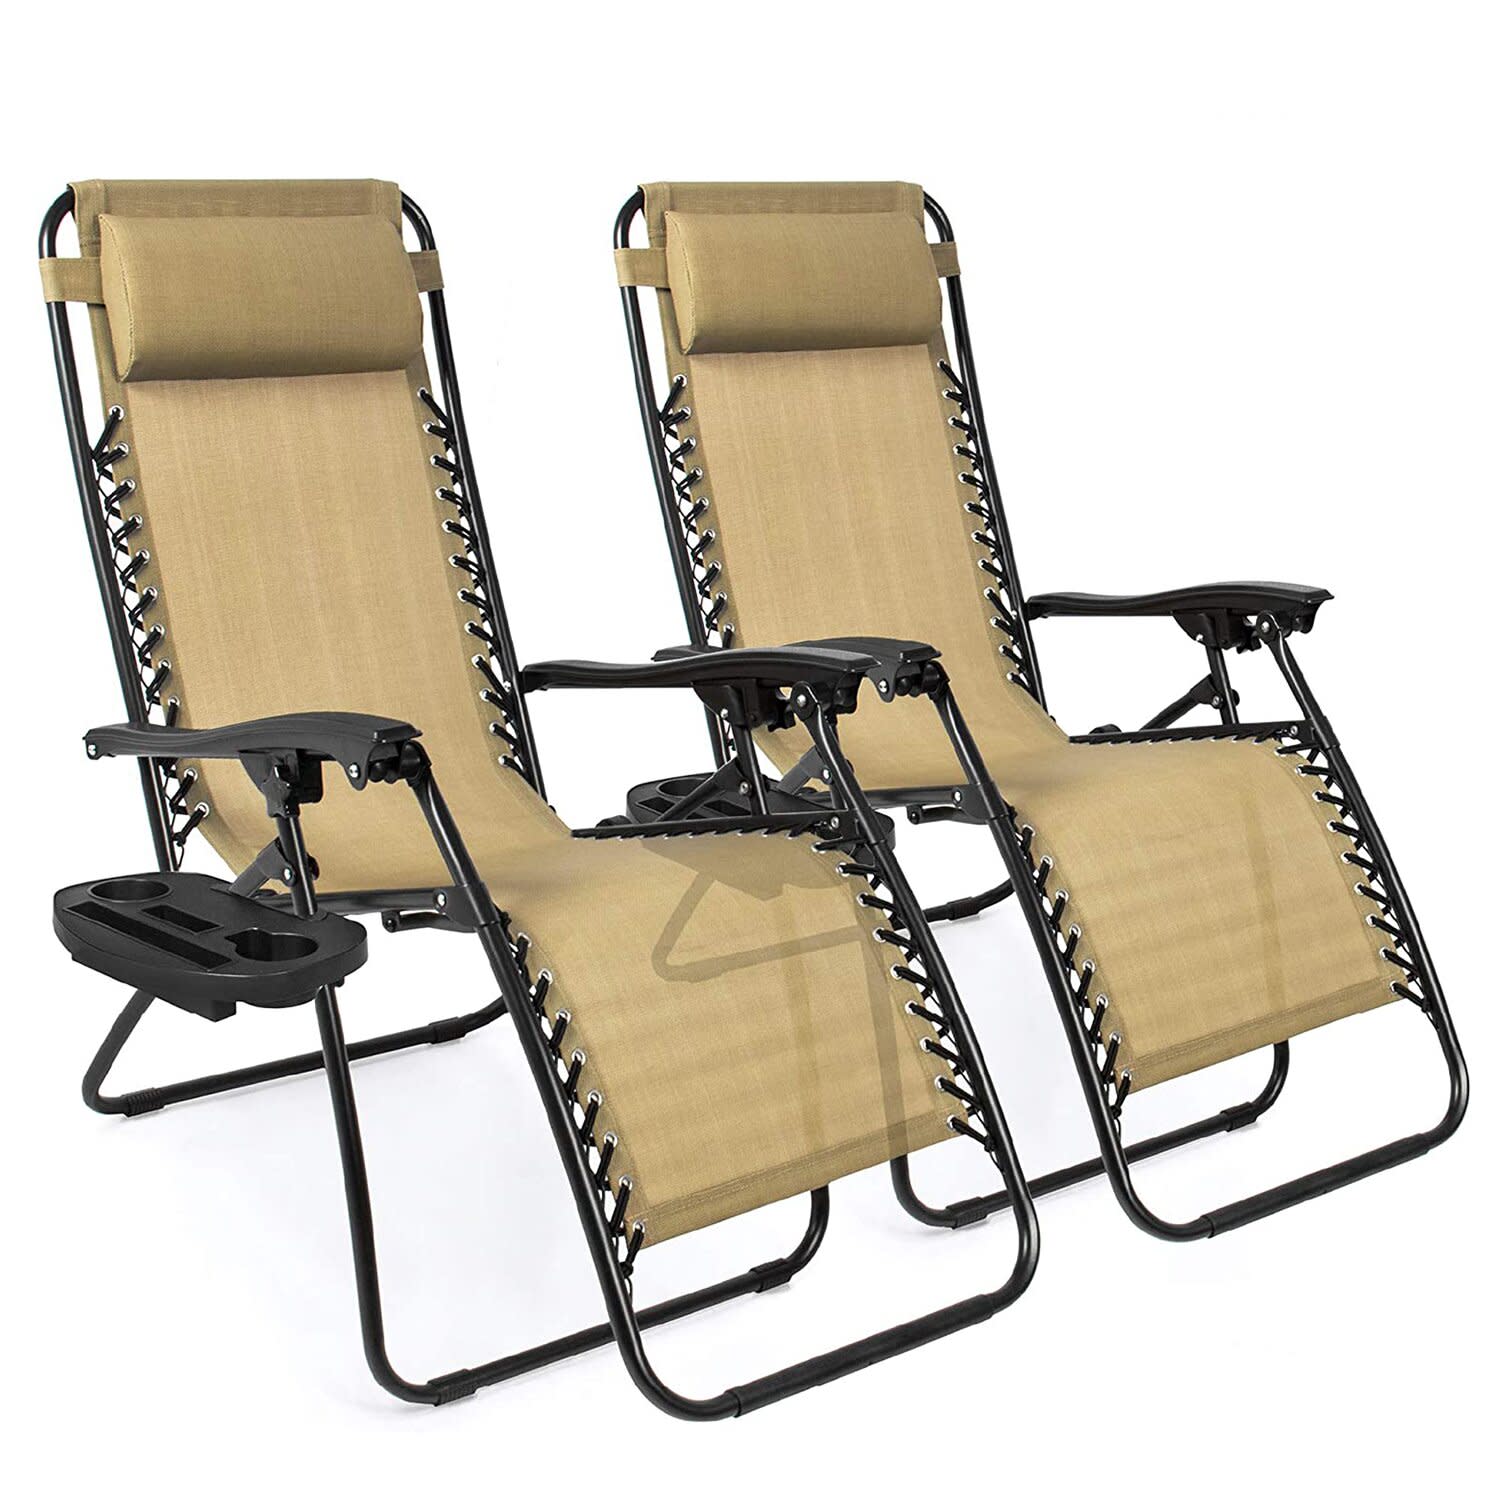 These Best-Selling Zero Gravity Lounge Chairs Have Over 2,800 Five-Star